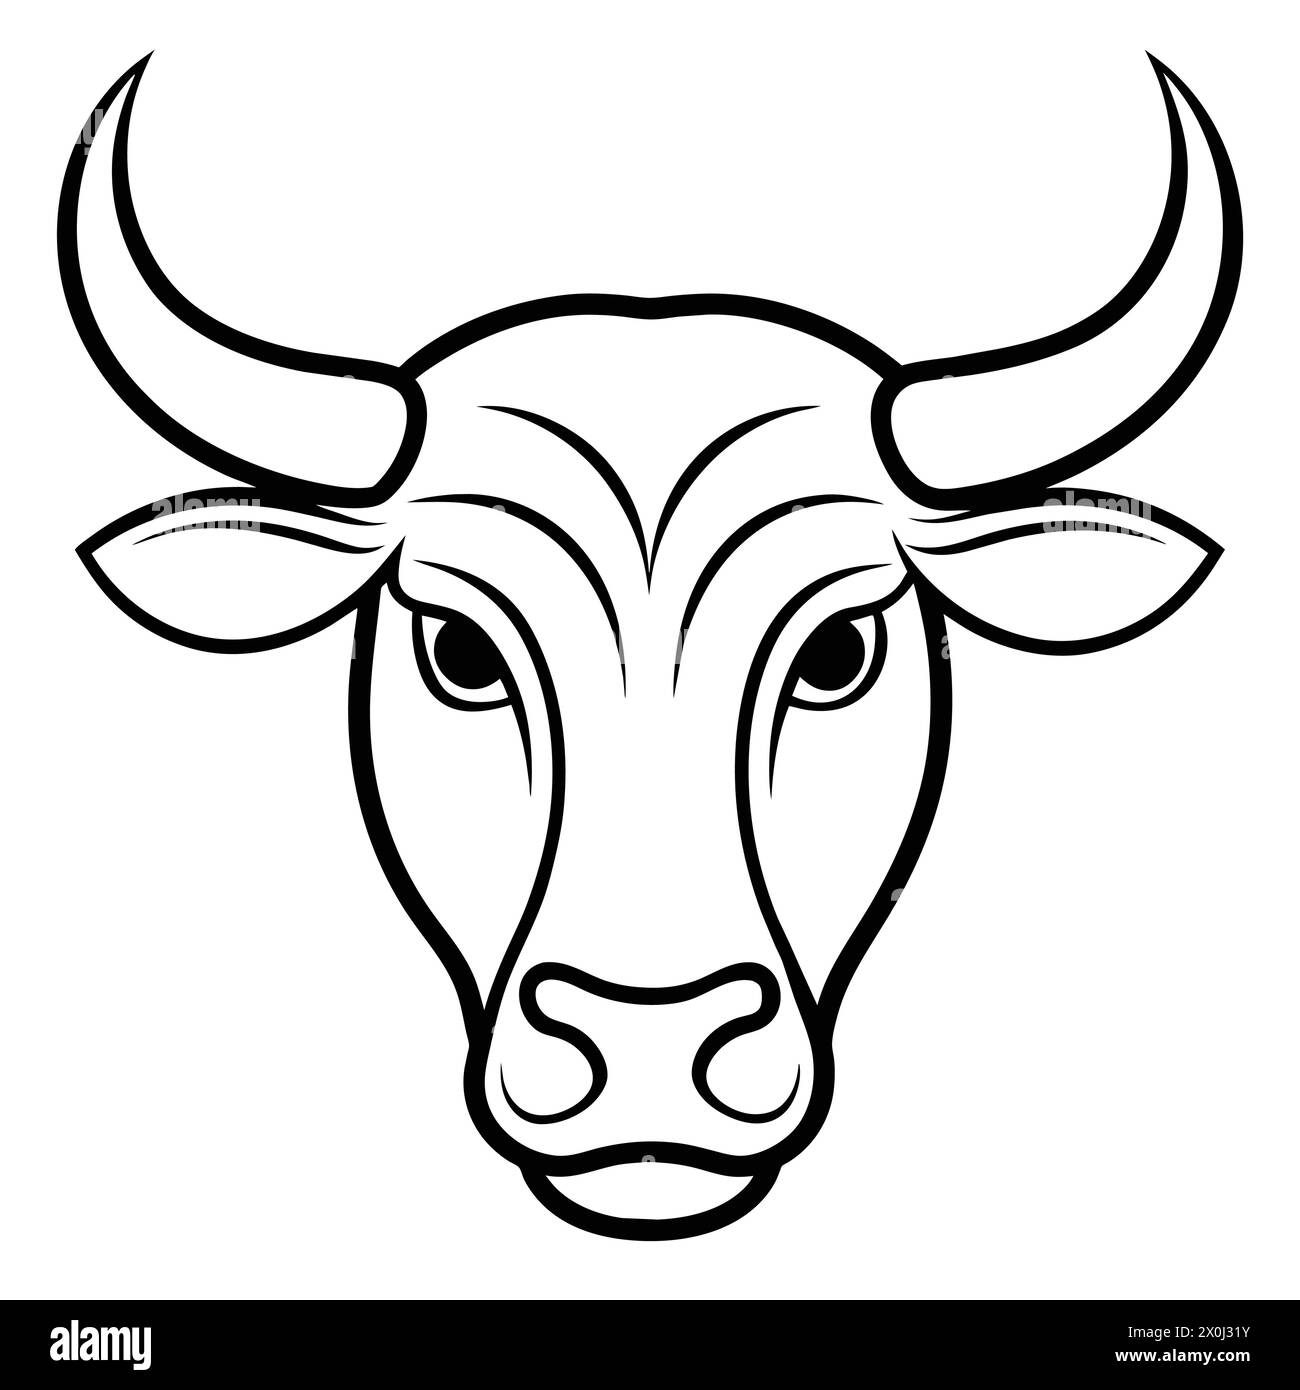 Strong Bull Head Illustrations - Ideal for Sports Team Logos, Steakhouse Branding, and Western-Themed Decor Stock Vector